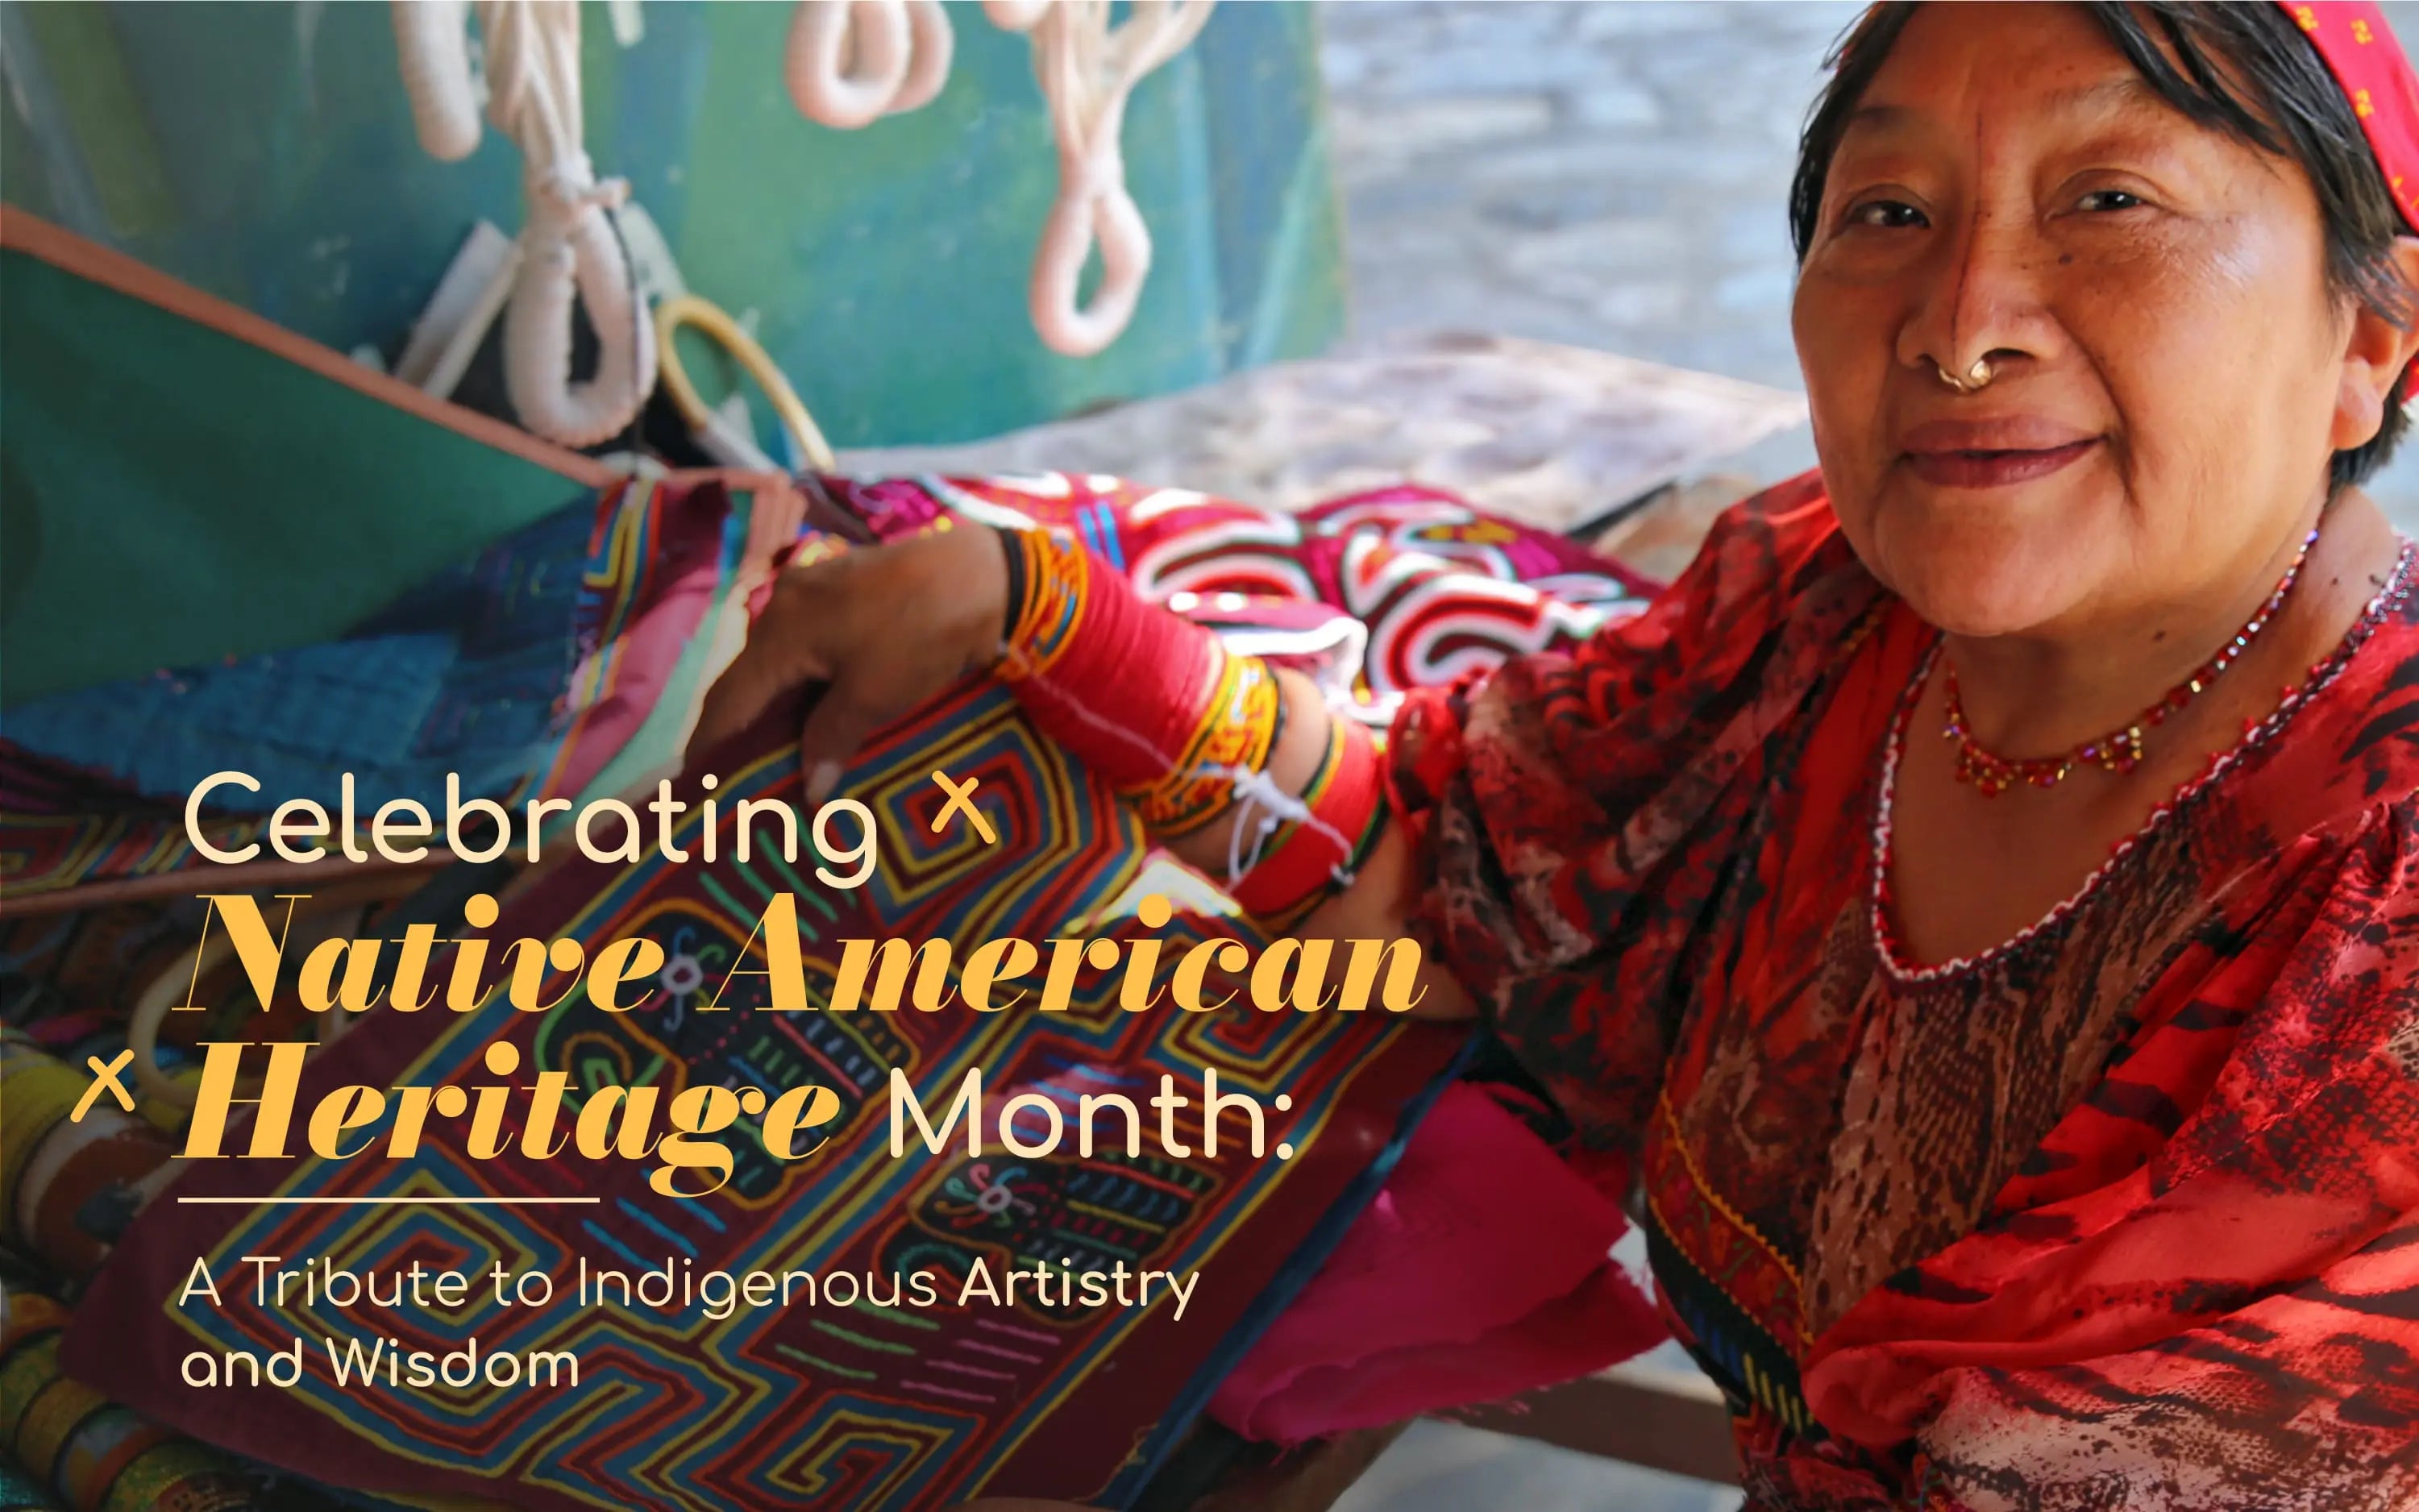 Celebrating Native American Heritage Month: A Tribute to Indigenous Artistry and Wisdom